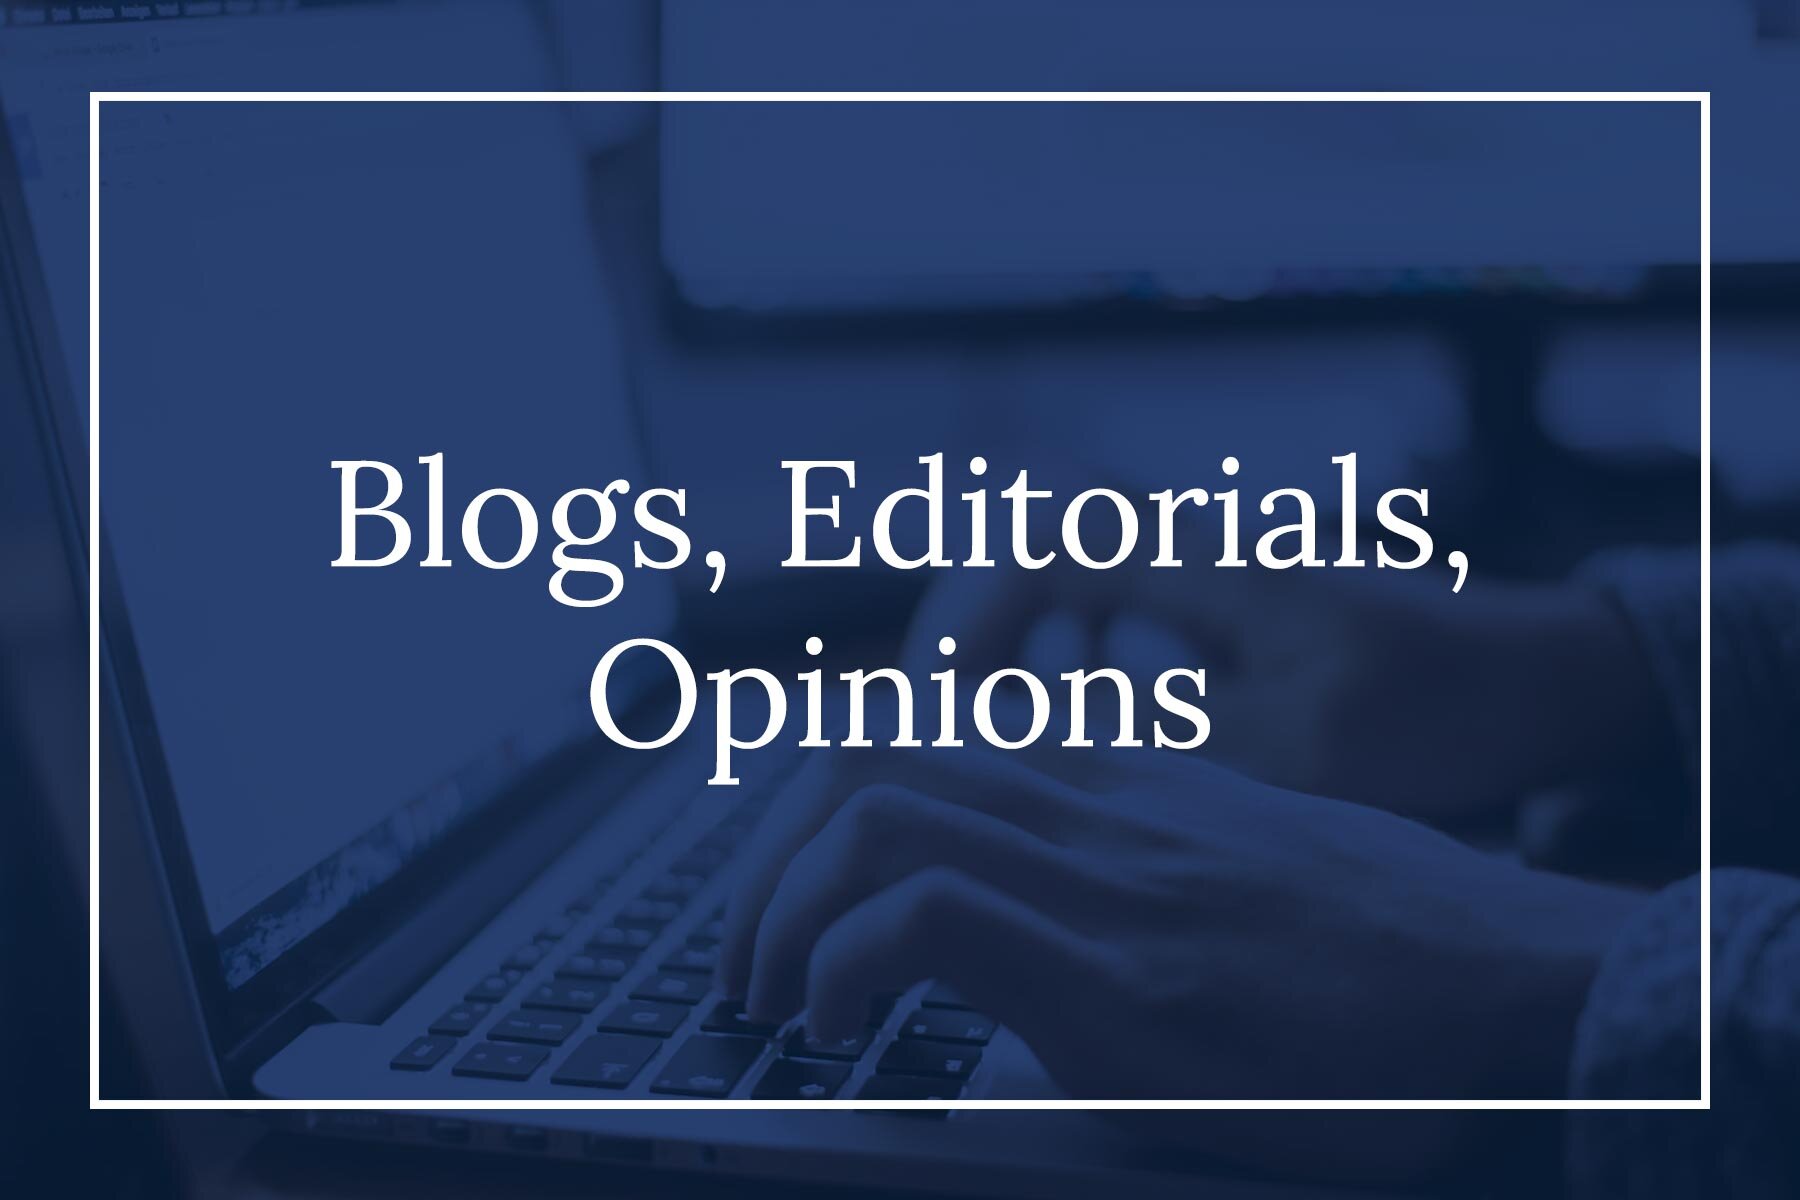 Blogs, Editorials, Opinions